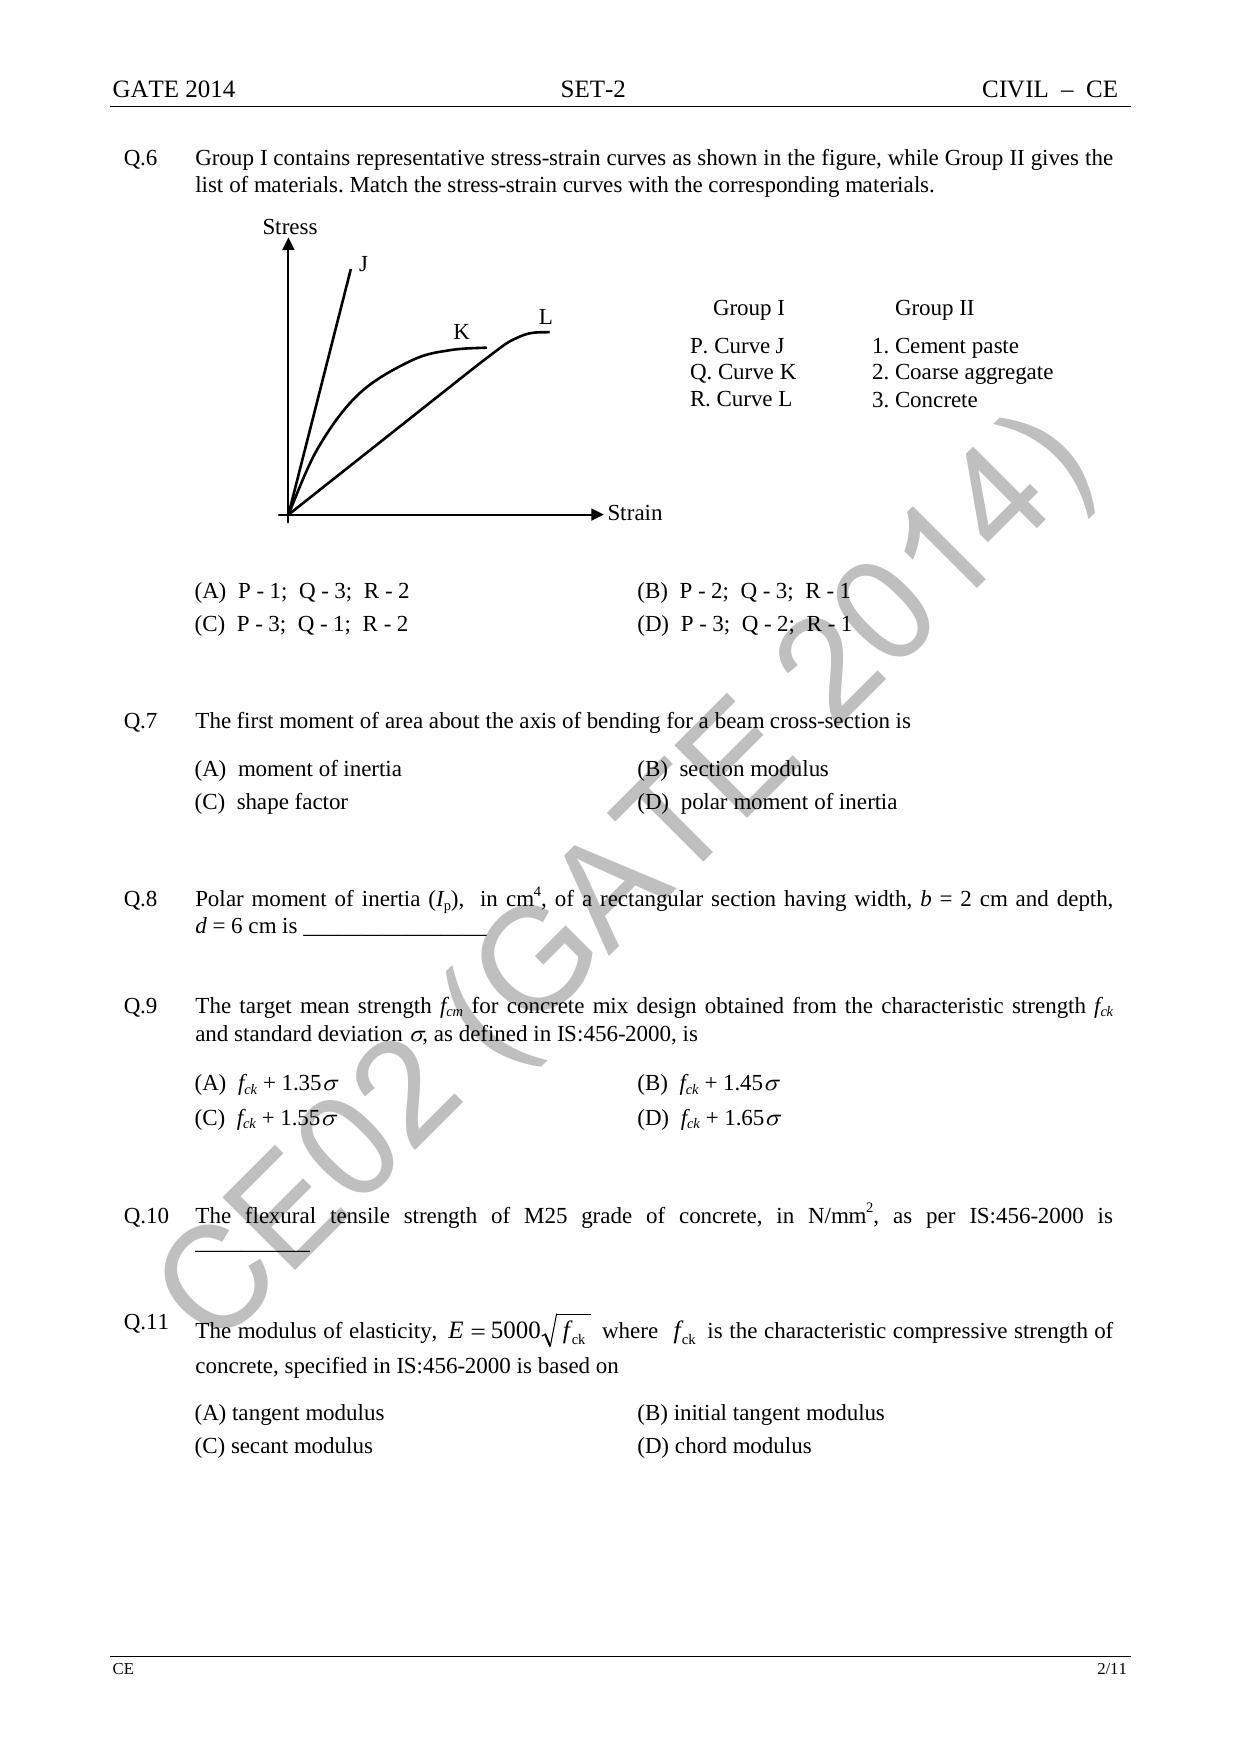 GATE 2014 Civil Engineering (CE) Question Paper with Answer Key - Page 30